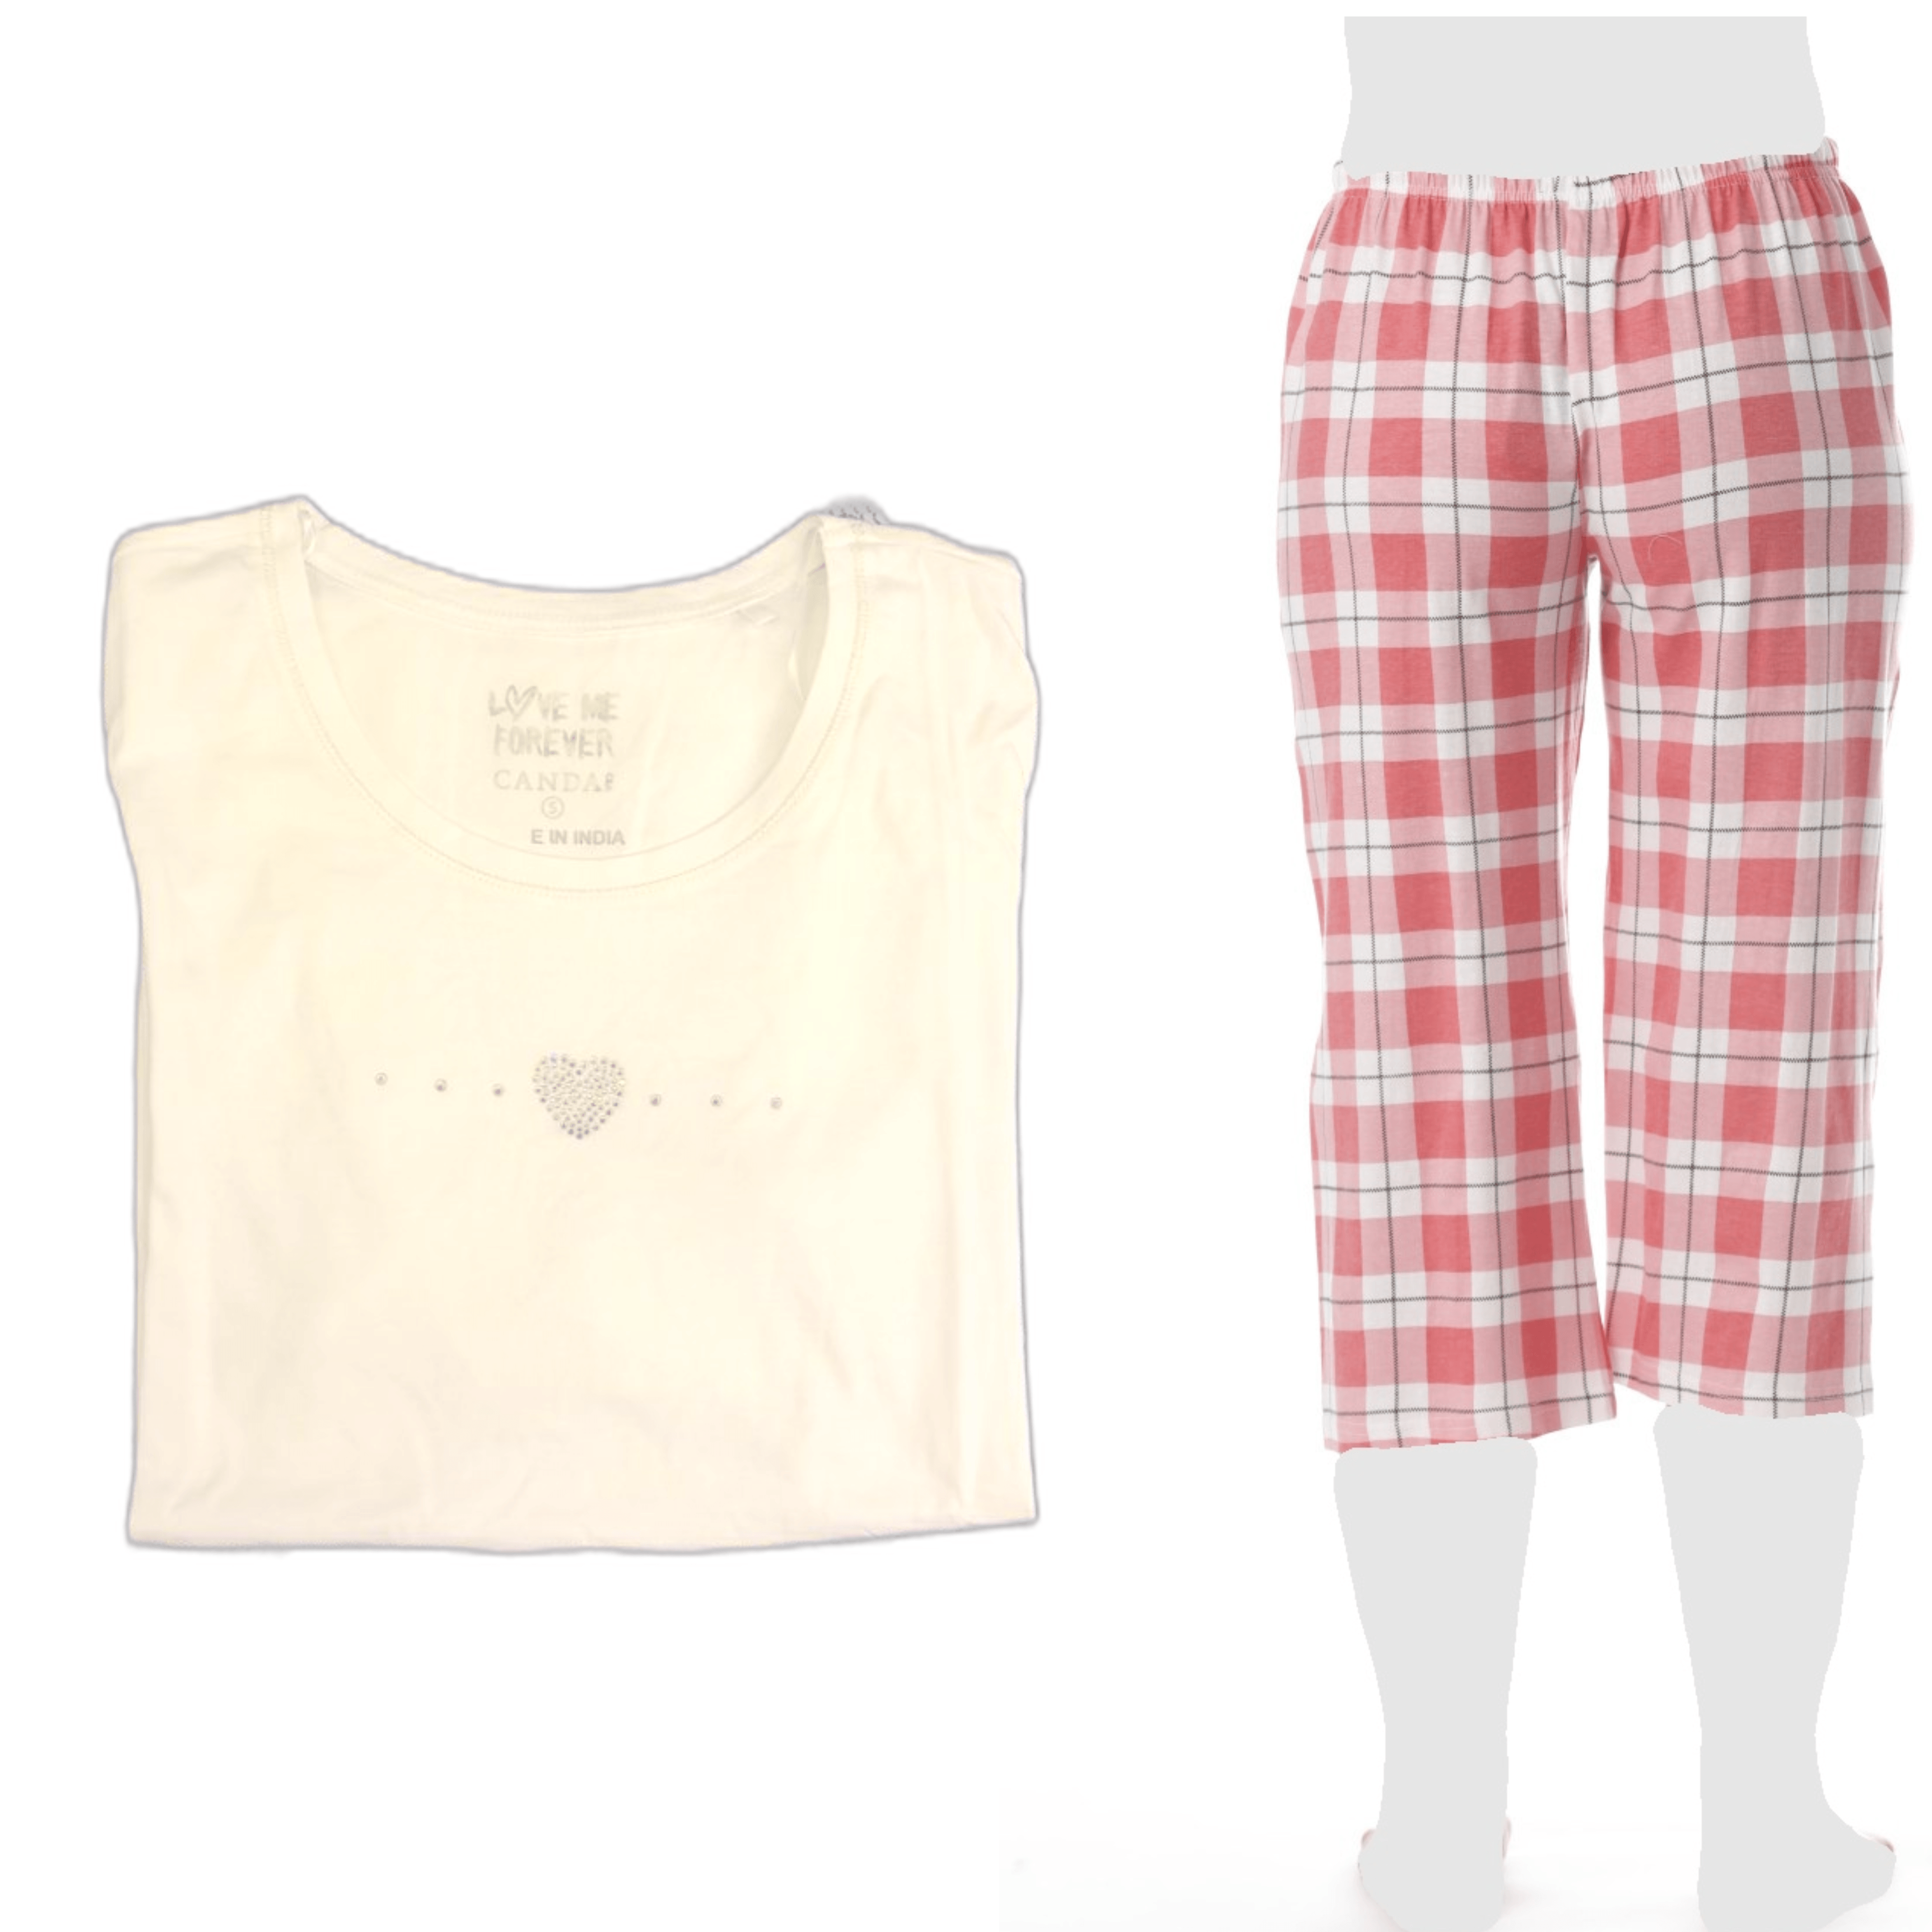 Just Love Women's Plaid Pajama Pants in 100% Cotton Jersey